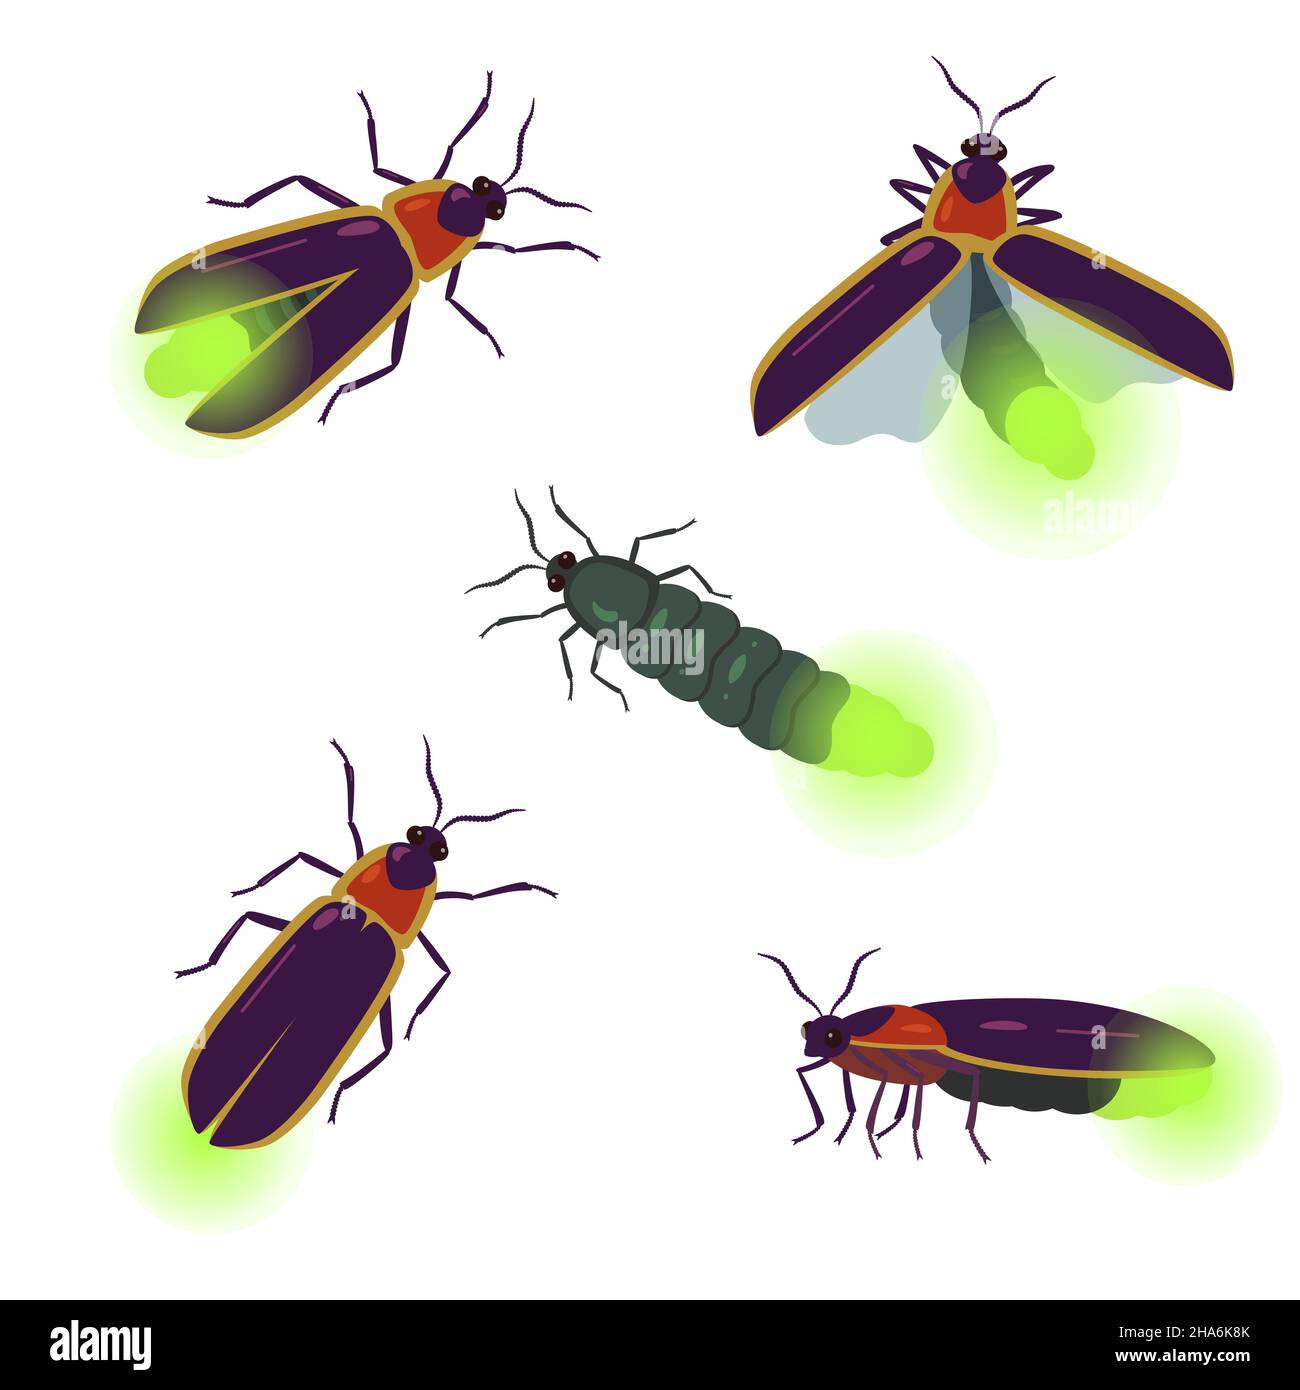 Vector set of firefly beetle drawings with different angles isolated on white background. Stock Vector